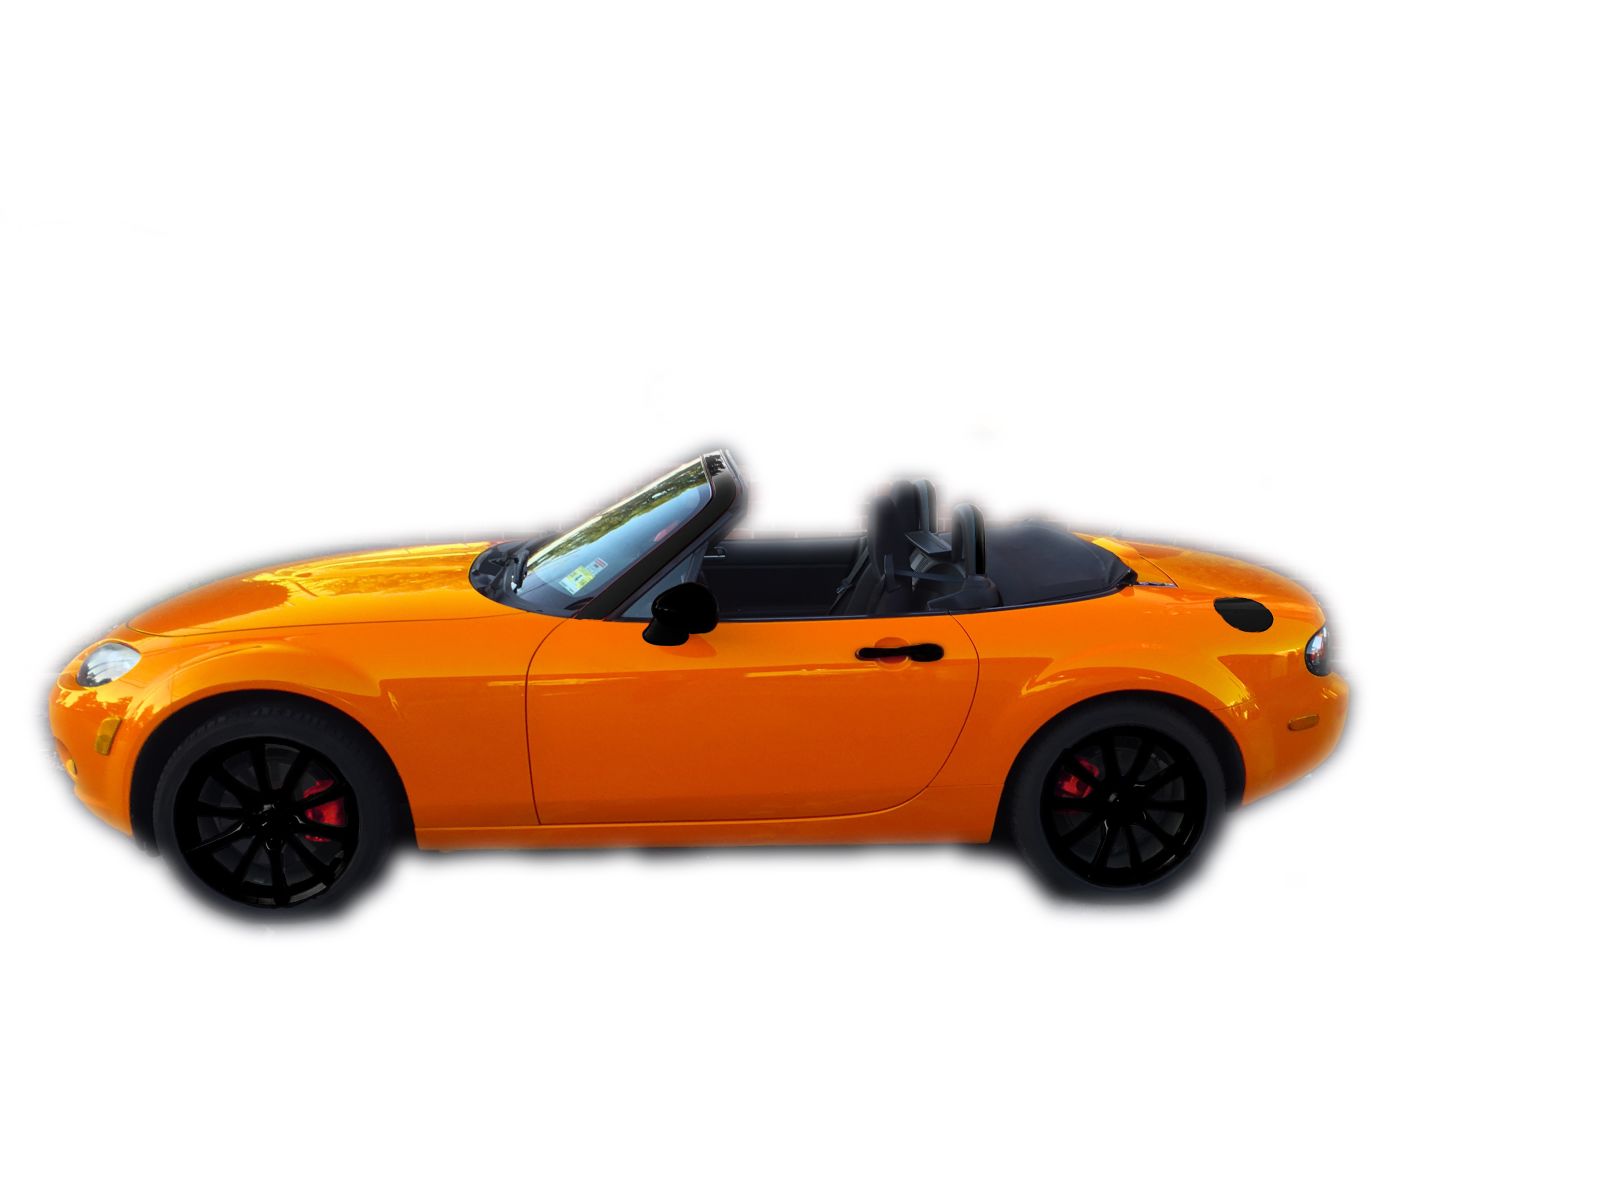 Illustration for article titled I want to paint my car orange.